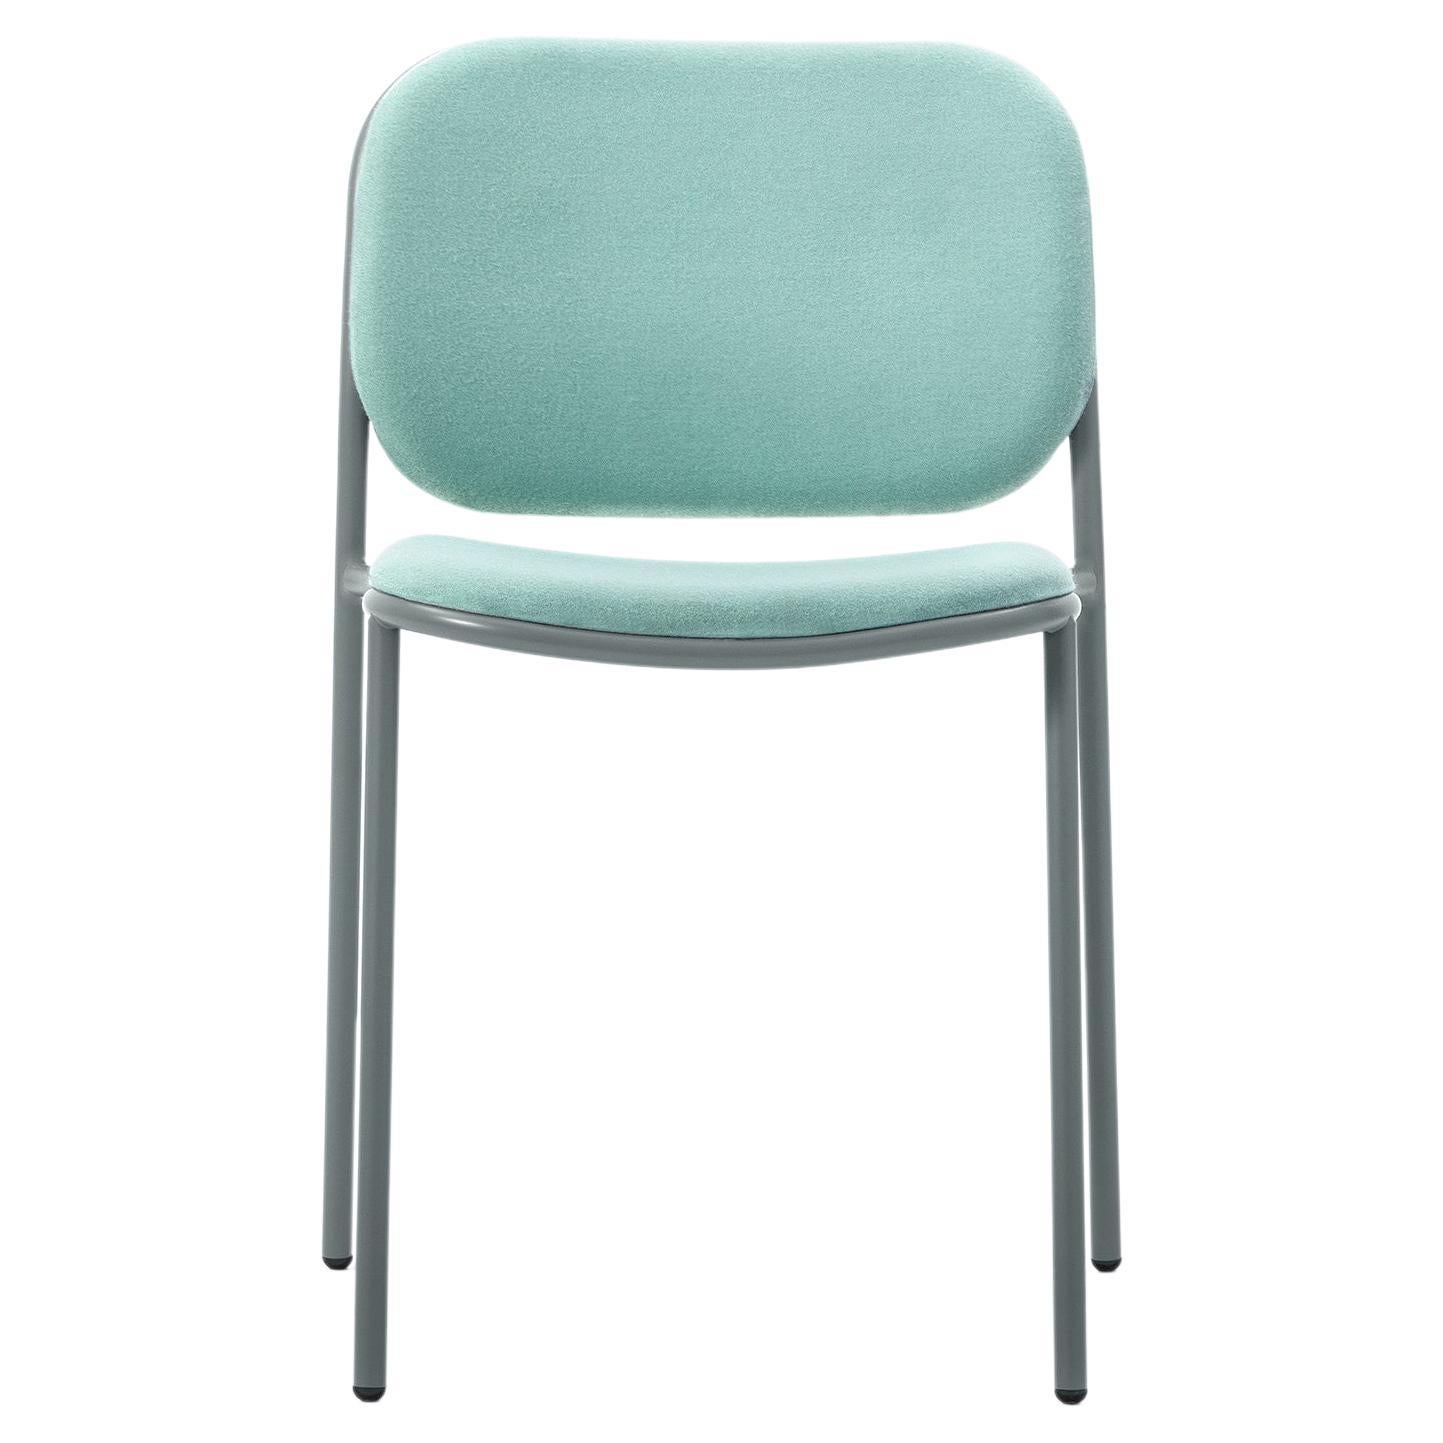 Metis Pad 180 Chair, Metal, Colors, Contract, Bar, Restaurant, Design, Fabric For Sale